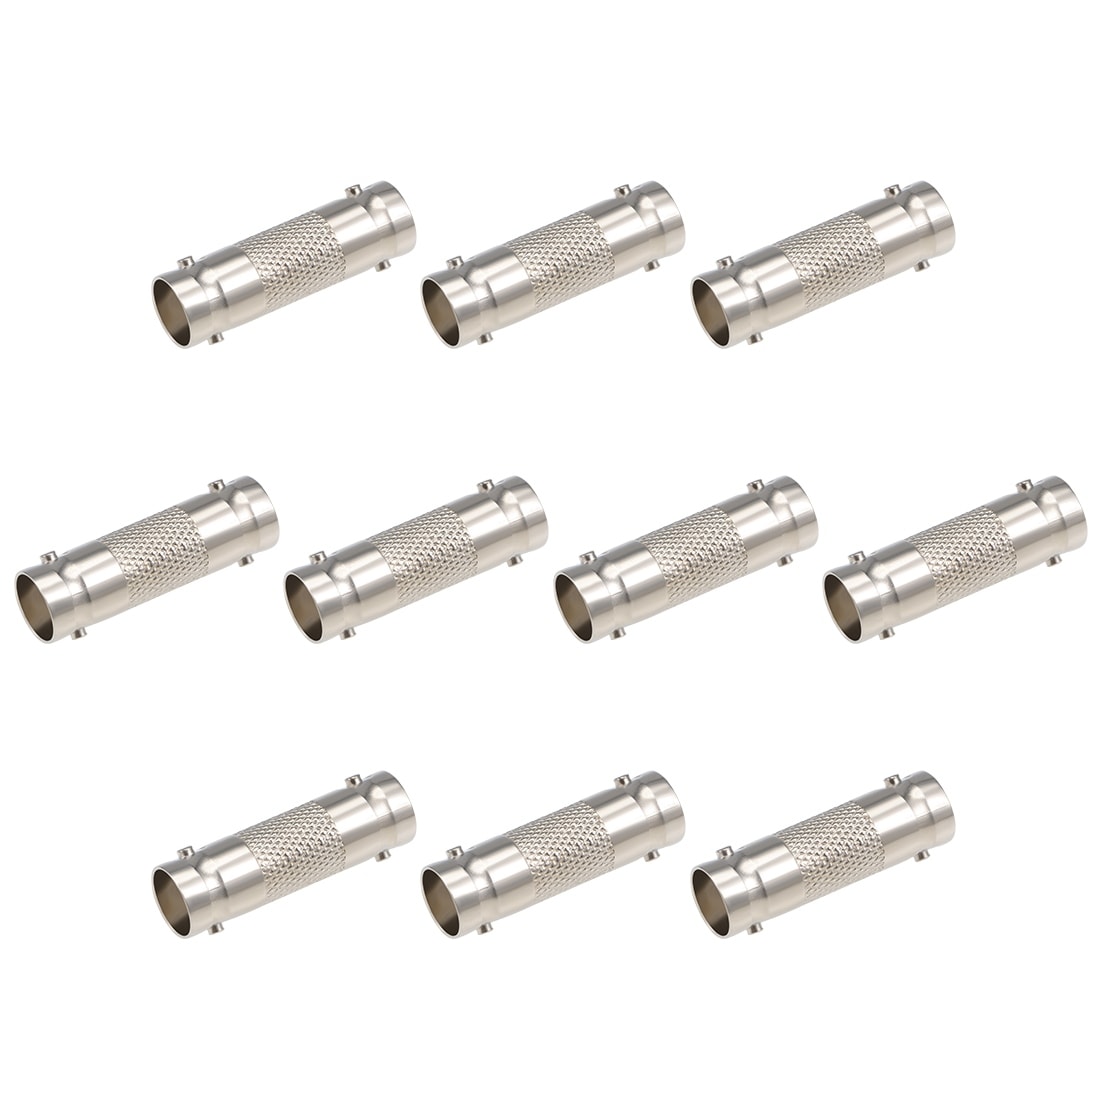 10x BNC Female To BNC Female Connector couplers Adapter For CCTV Video Camera